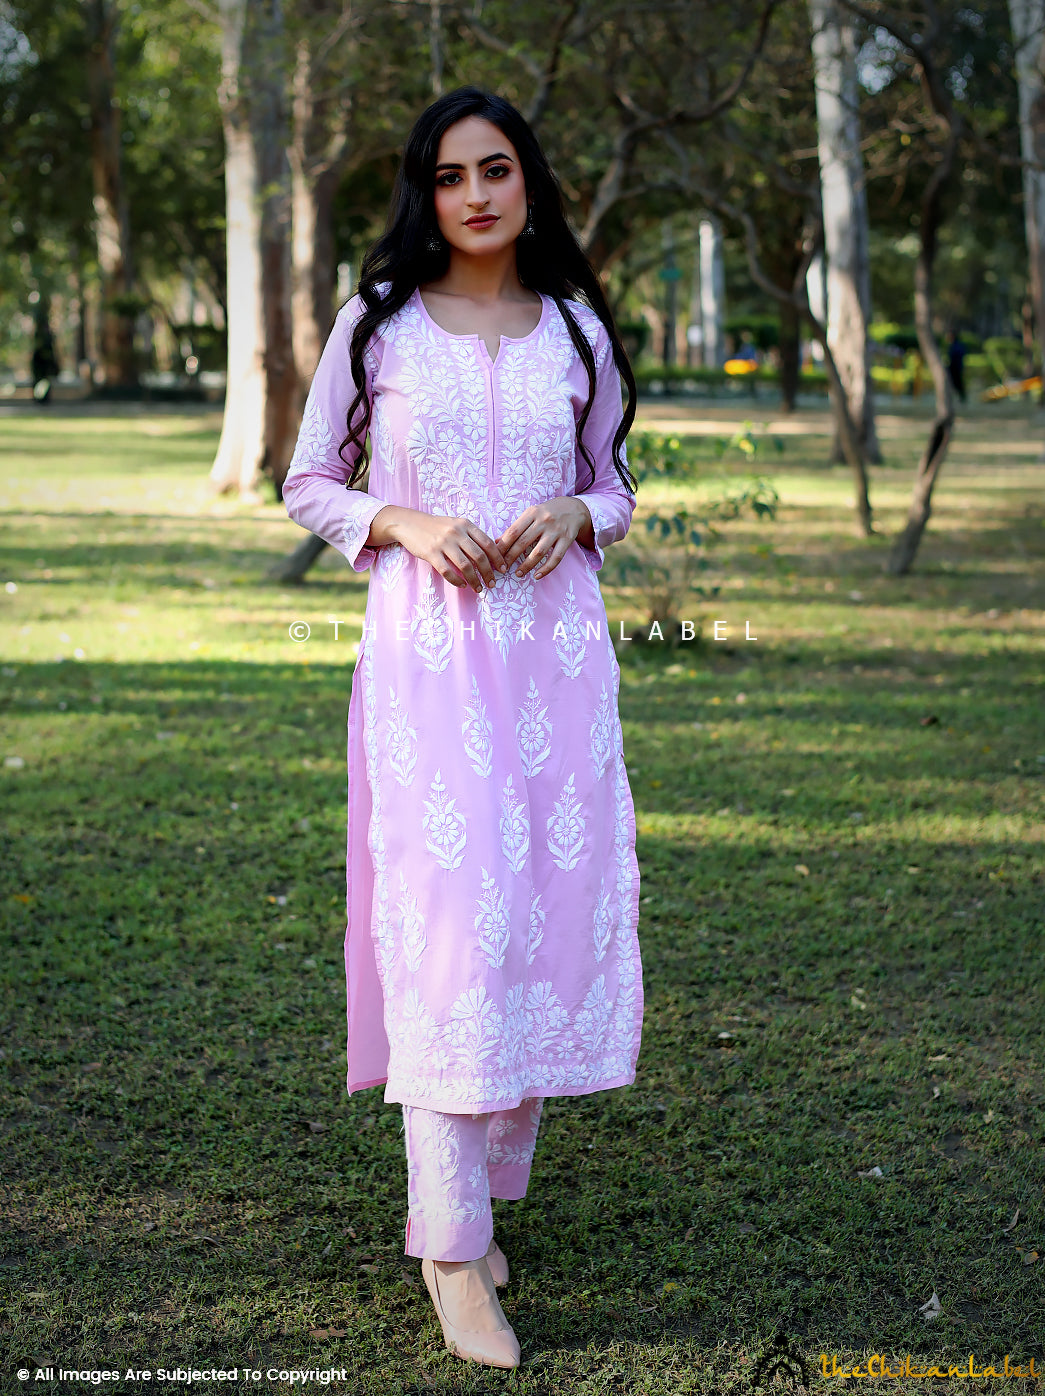 Kurti With Pant - Buy Kurti With Pant online at Best Prices in India |  Flipkart.com